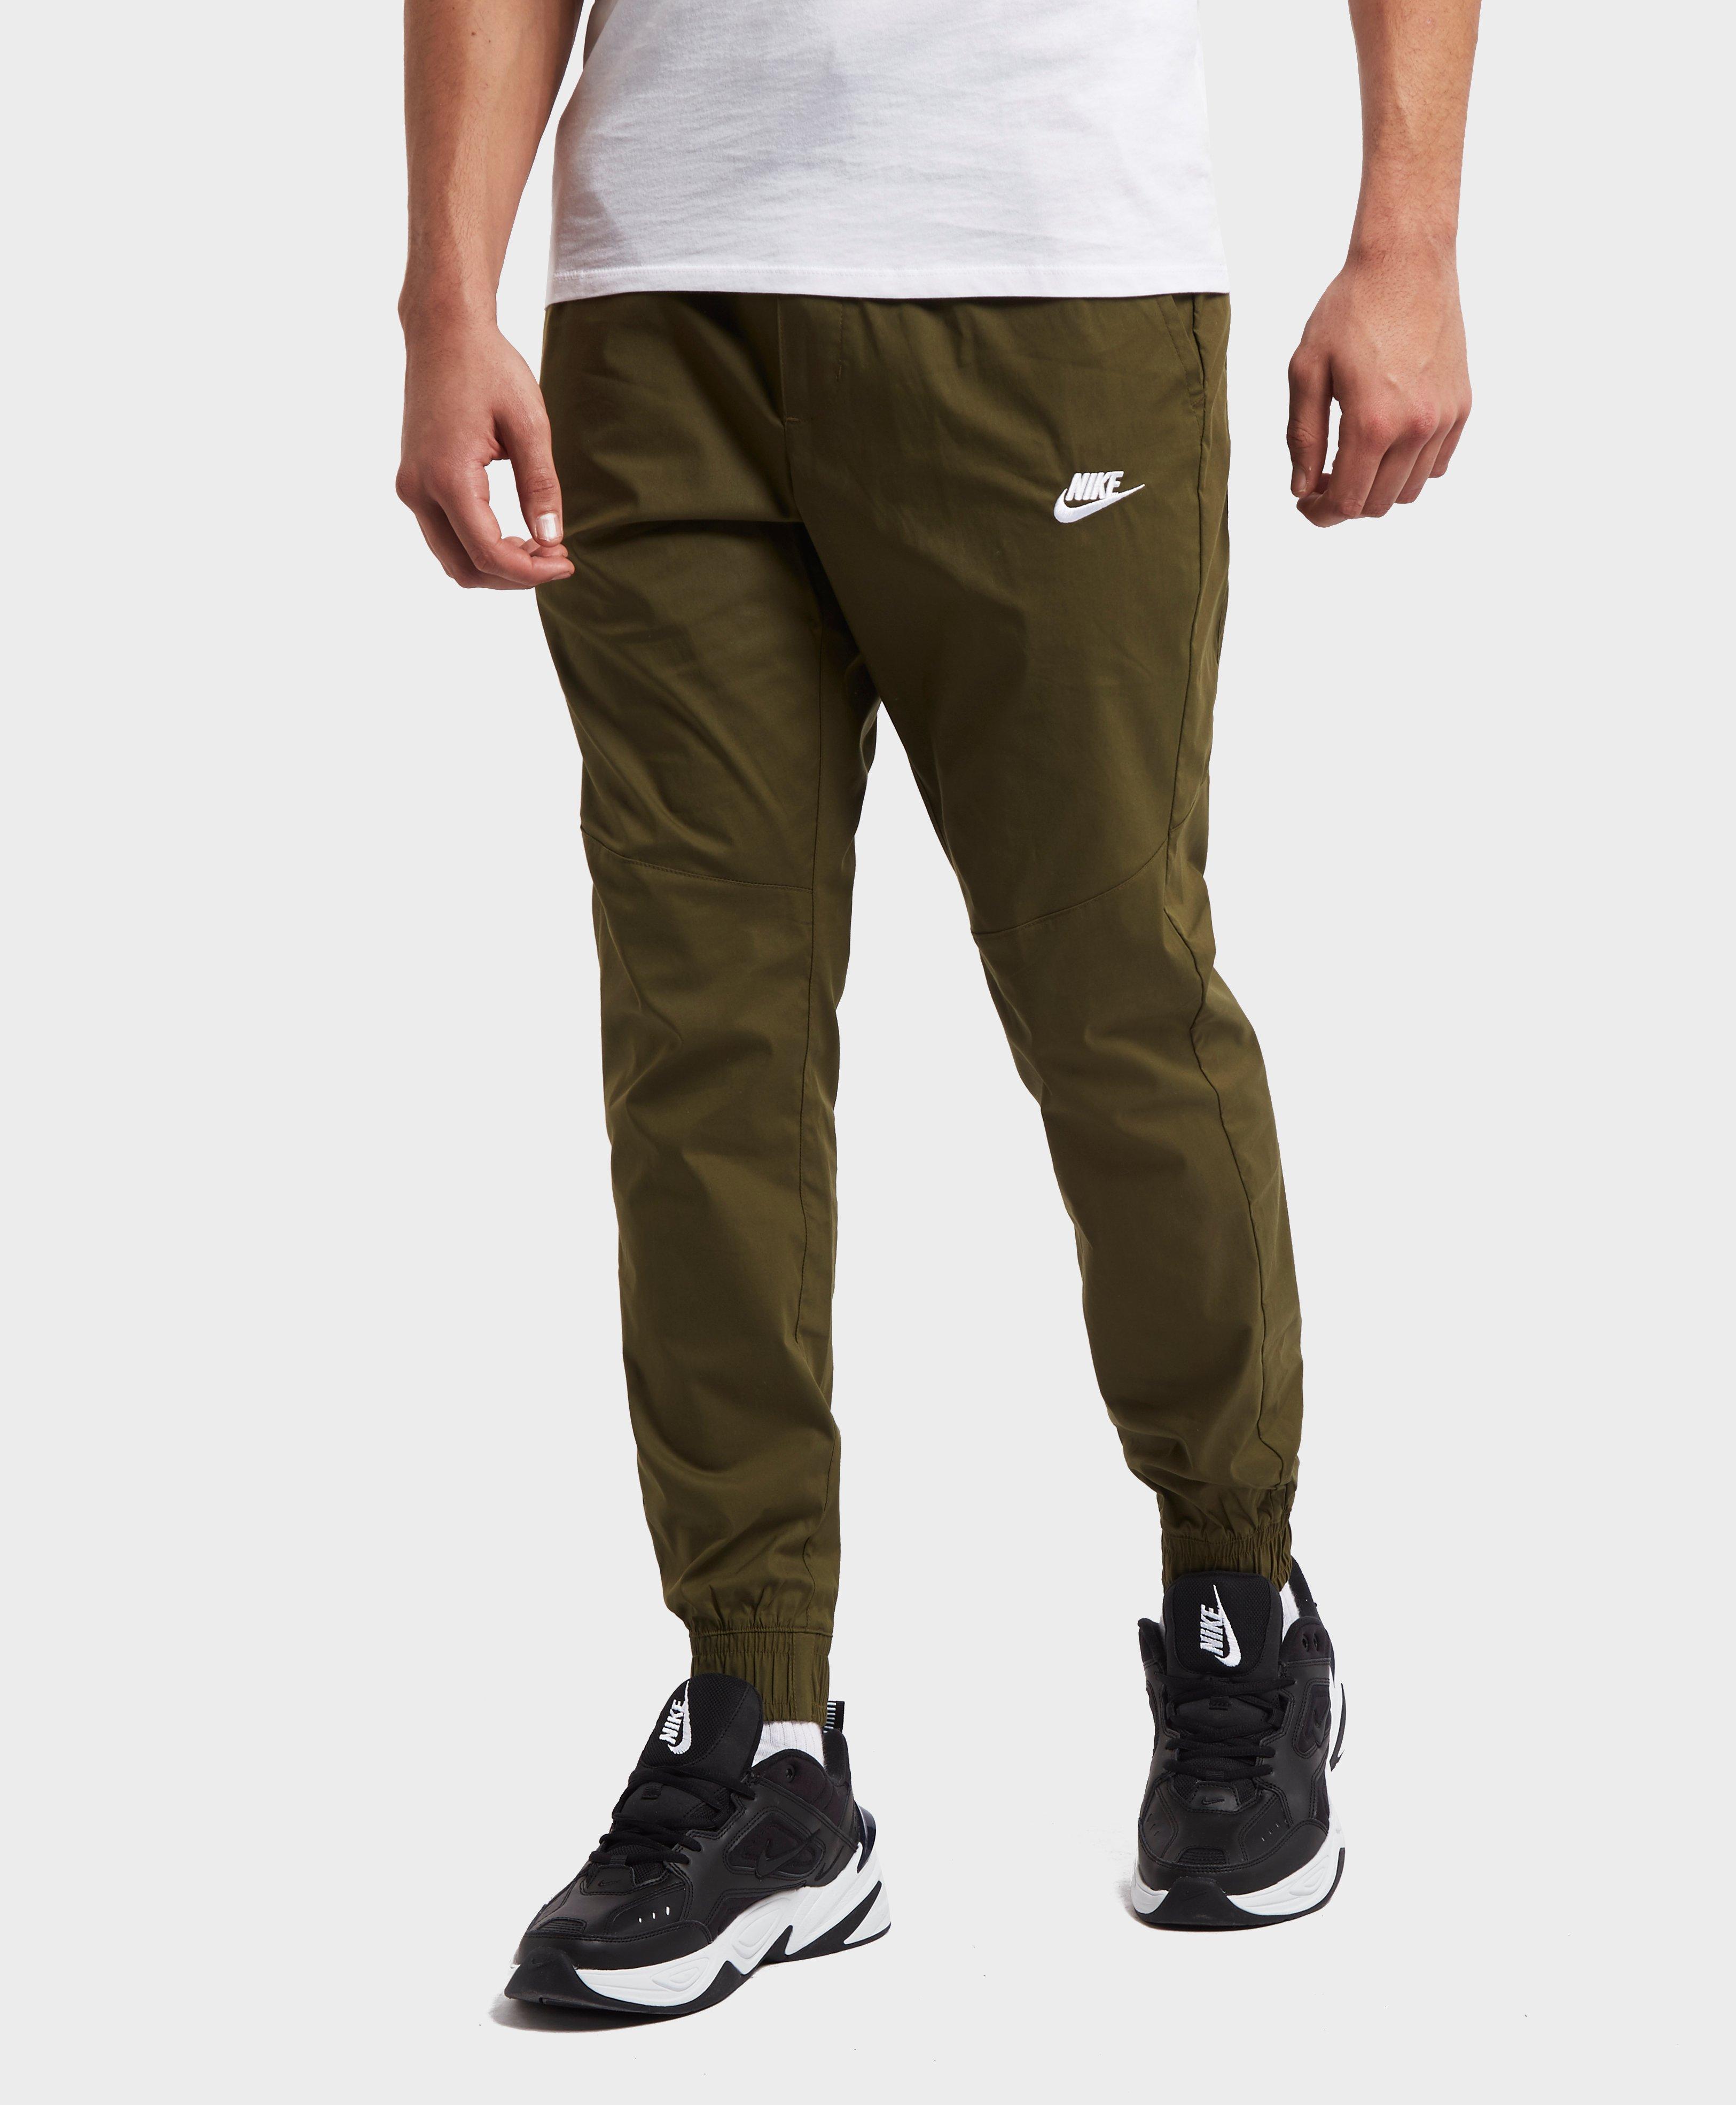 Nike Cotton Twill Cuffed Track Pants in Green for Men - Lyst